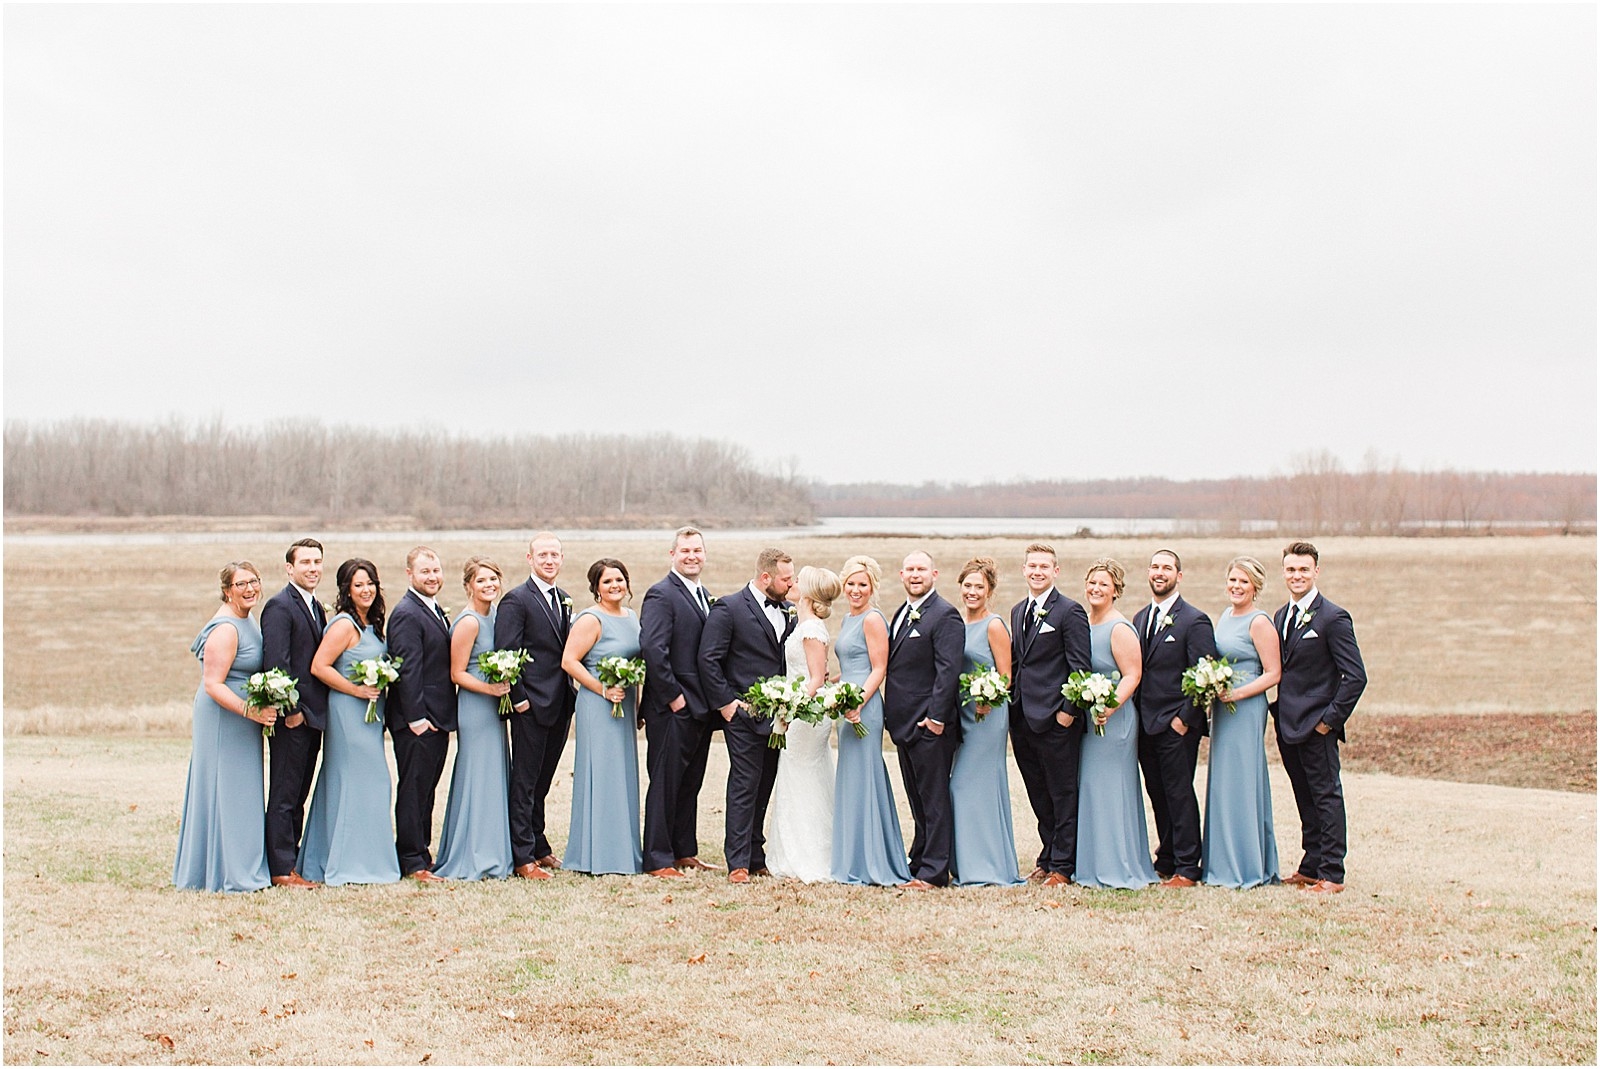 A Classic Winter Wedding in New Harmony | Rachel and Ryan | Bret and Brandie Photography 0067.jpg